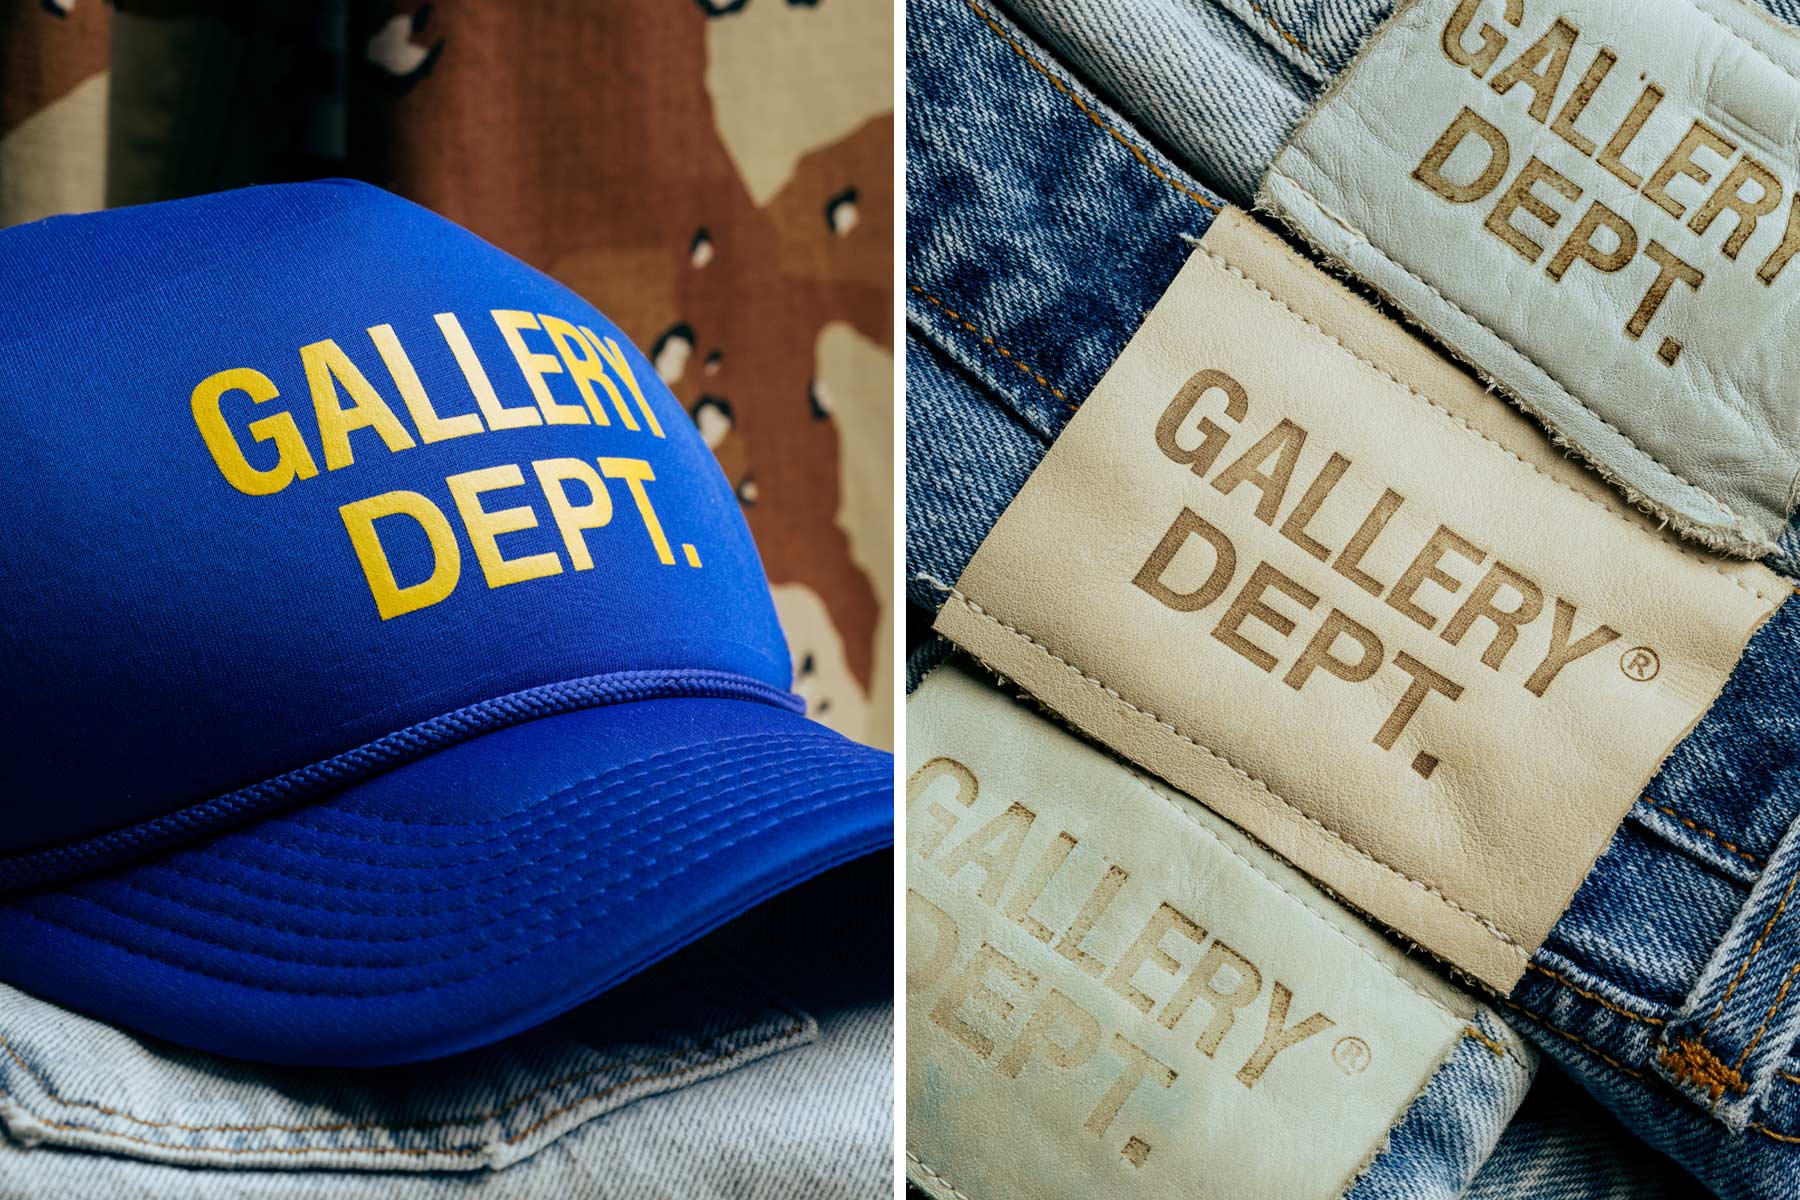 Open Style: The Allure of Gallery Dept Shirts and Hats